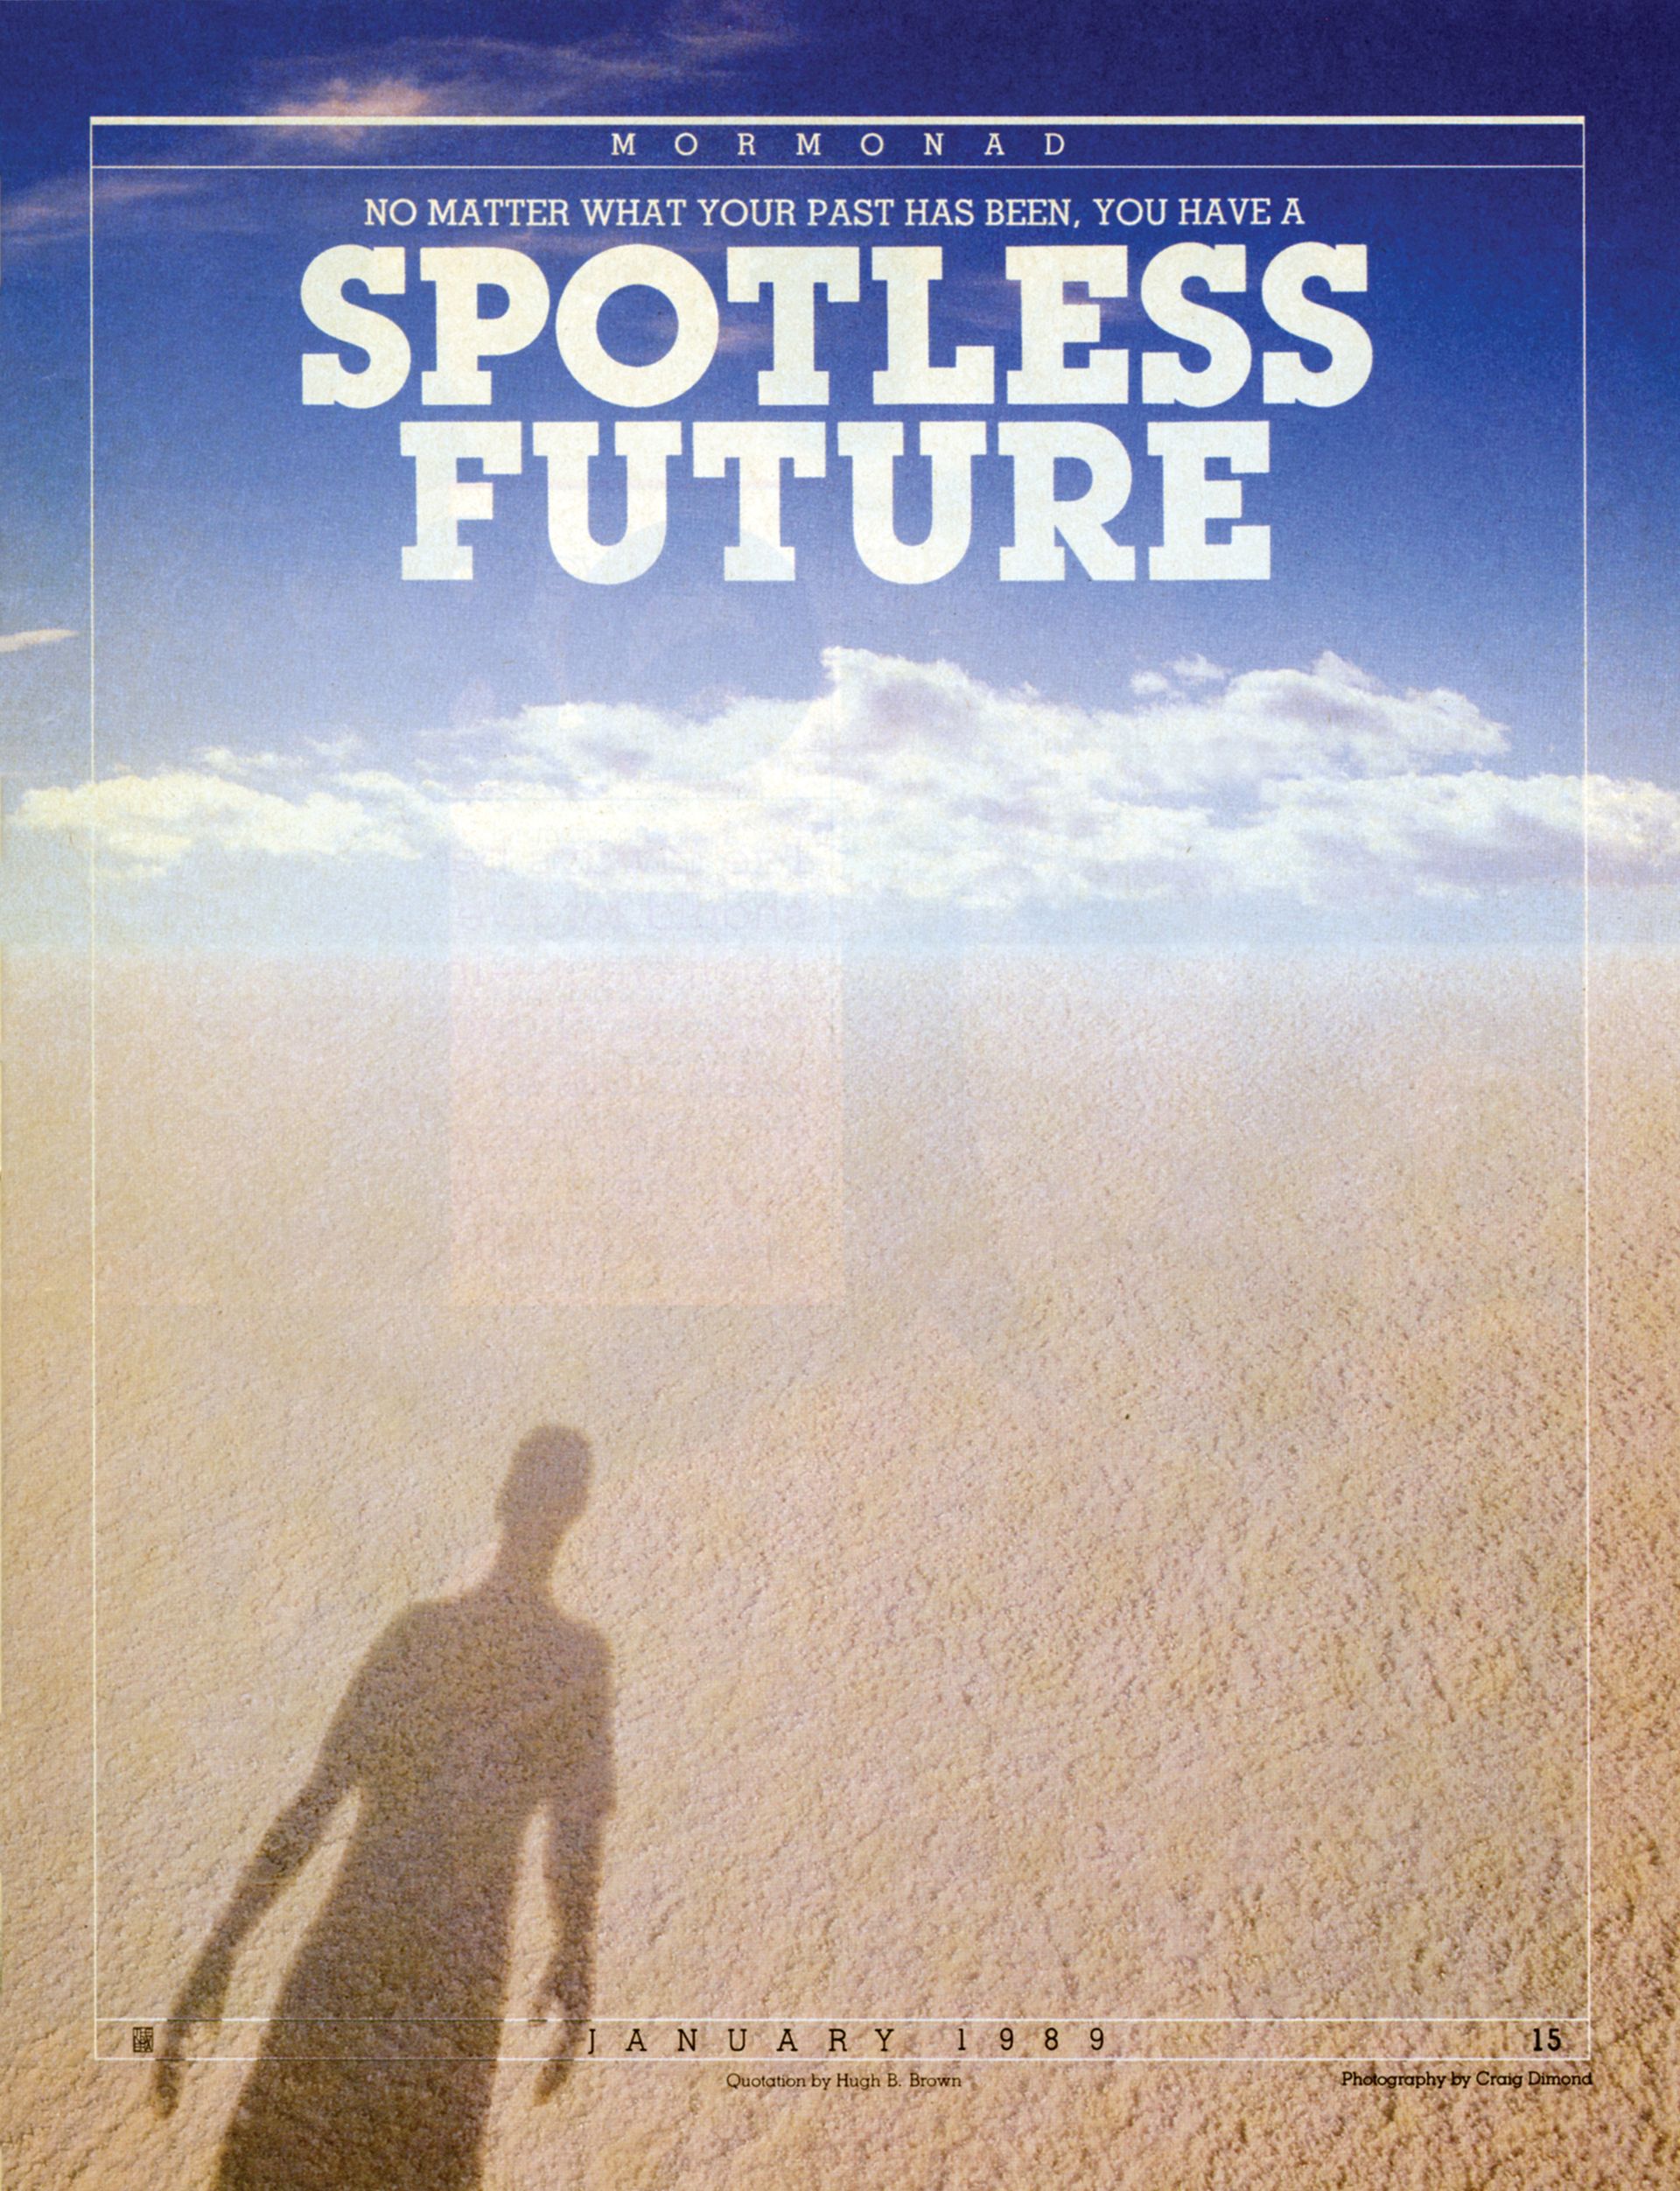 No Matter What Your Past Has Been, You Have A Spotless Future. Jan. 1989 © undefined ipCode 1.